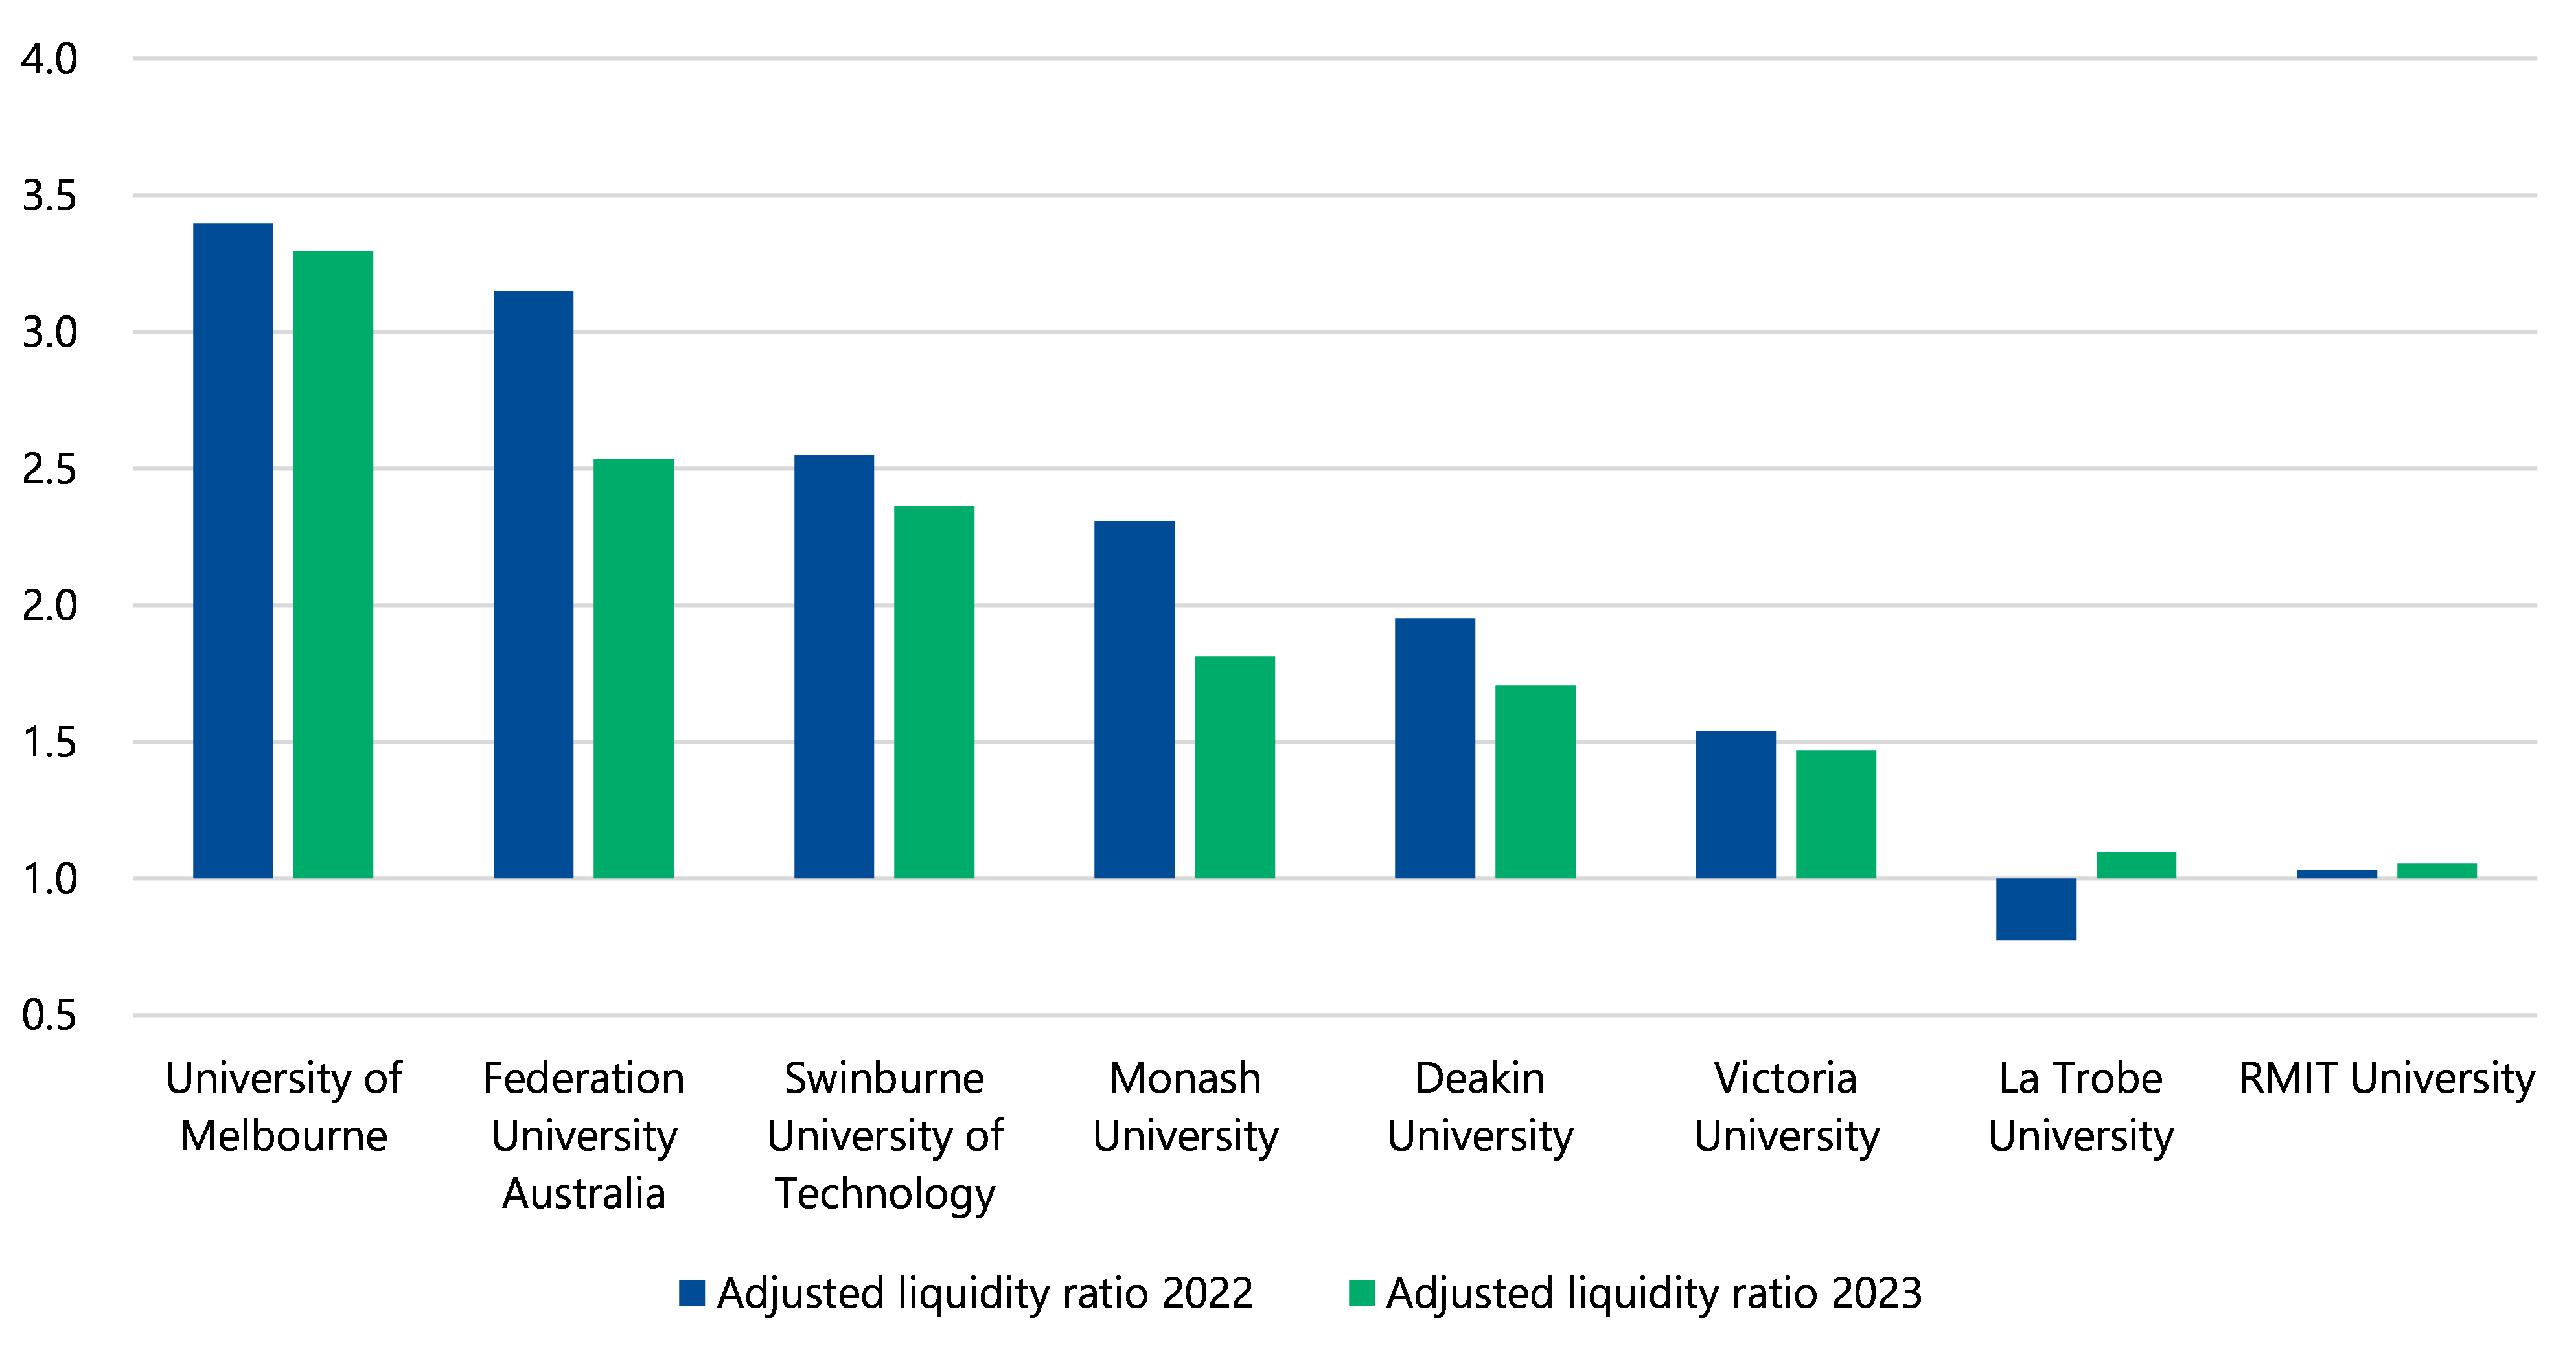 Figure 11 is a bar chart that shows the adjusted liquidity ratio reduced slightly in 2023 from 2022 for University of Melbourne, Federation University Australia, Swinburne University of Technology, Monash University, Deakin University, and Victoria University, while the ratio increased slightly for La Trobe University and RMIT University.